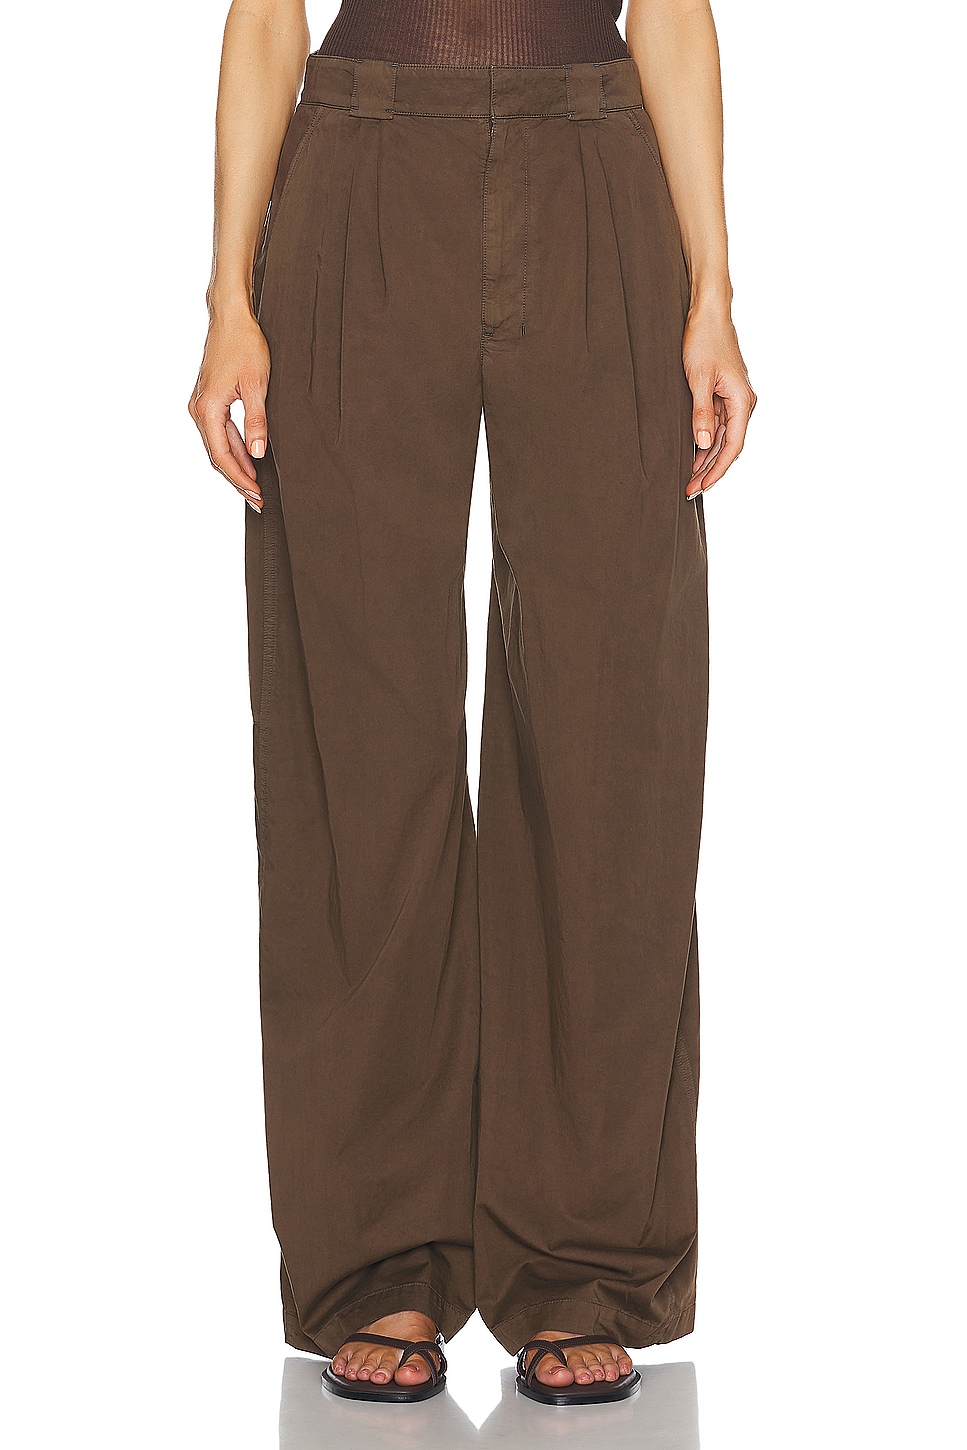 Image 1 of Lemaire Wide Leg Pant in Dark Tobacco